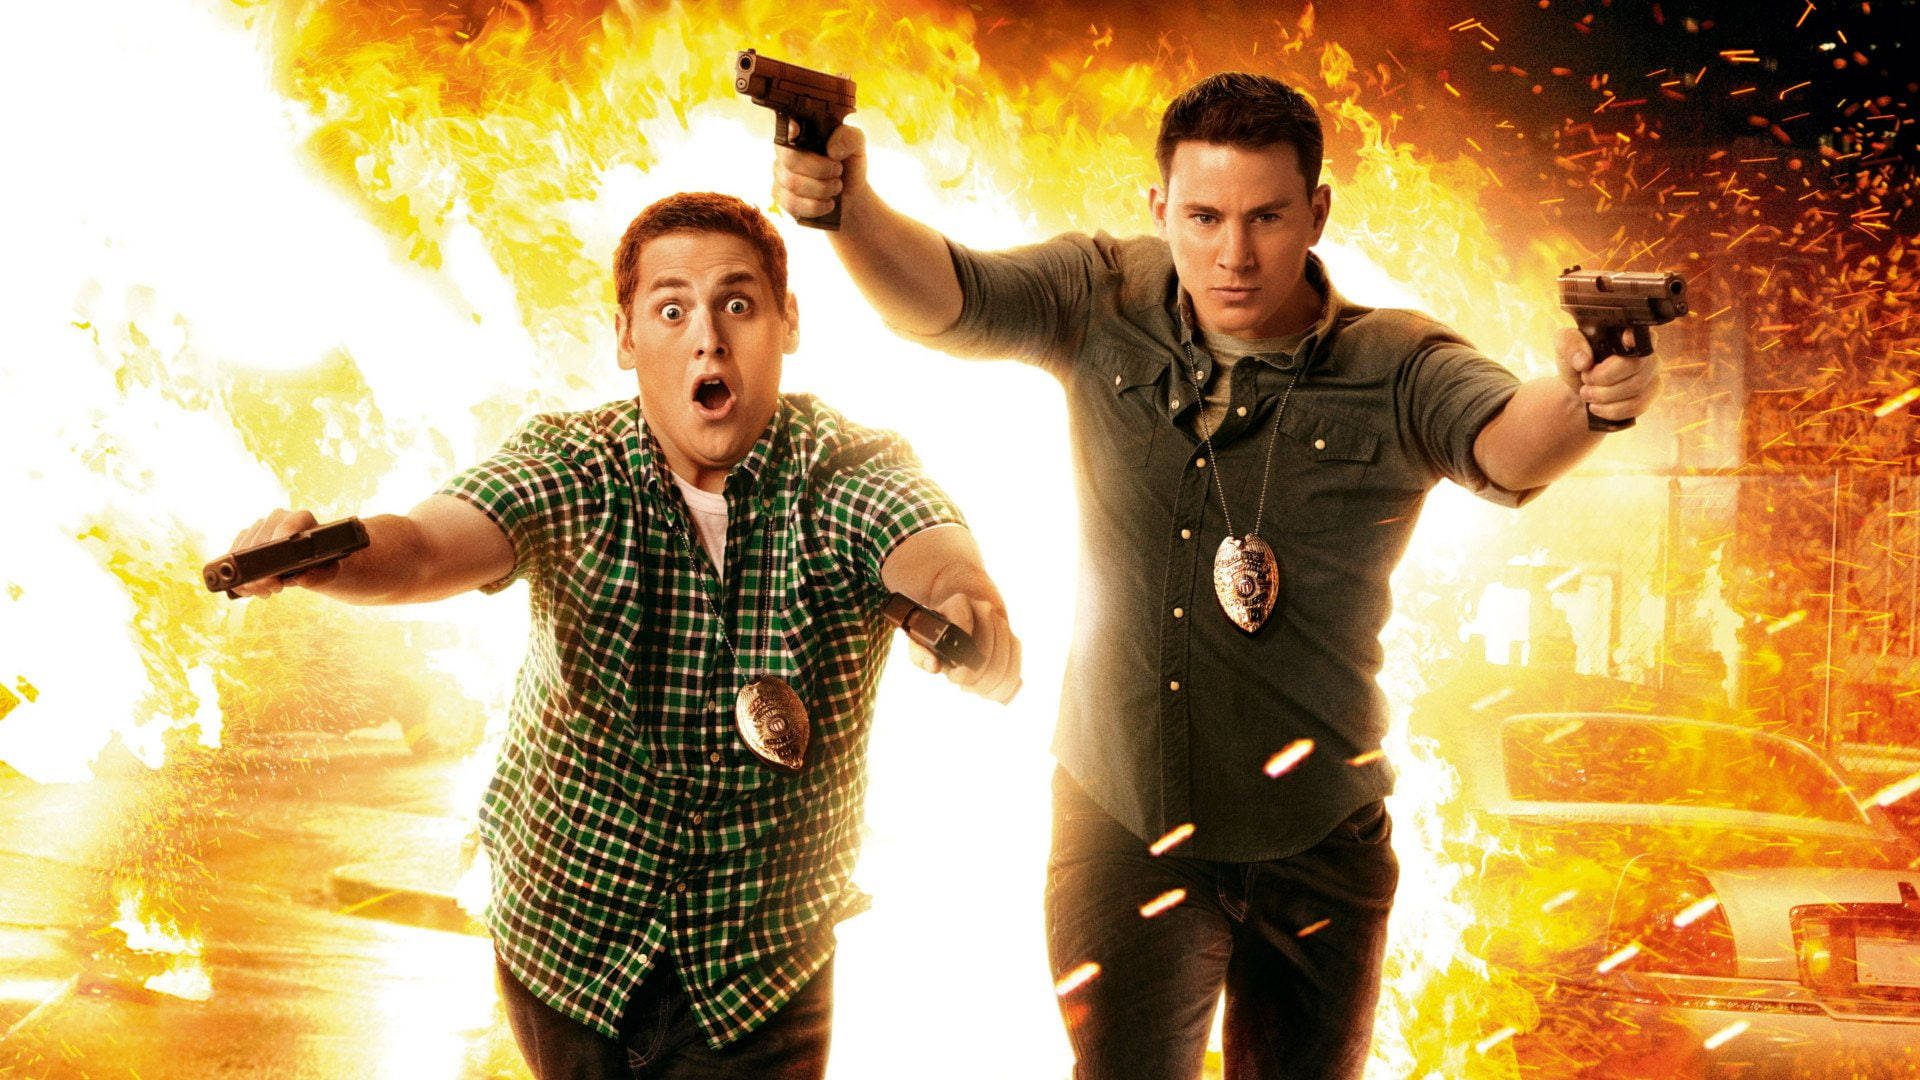 Hollywood Stars Channing Tatum And Jonah Hill In A Light-hearted Moment. Background